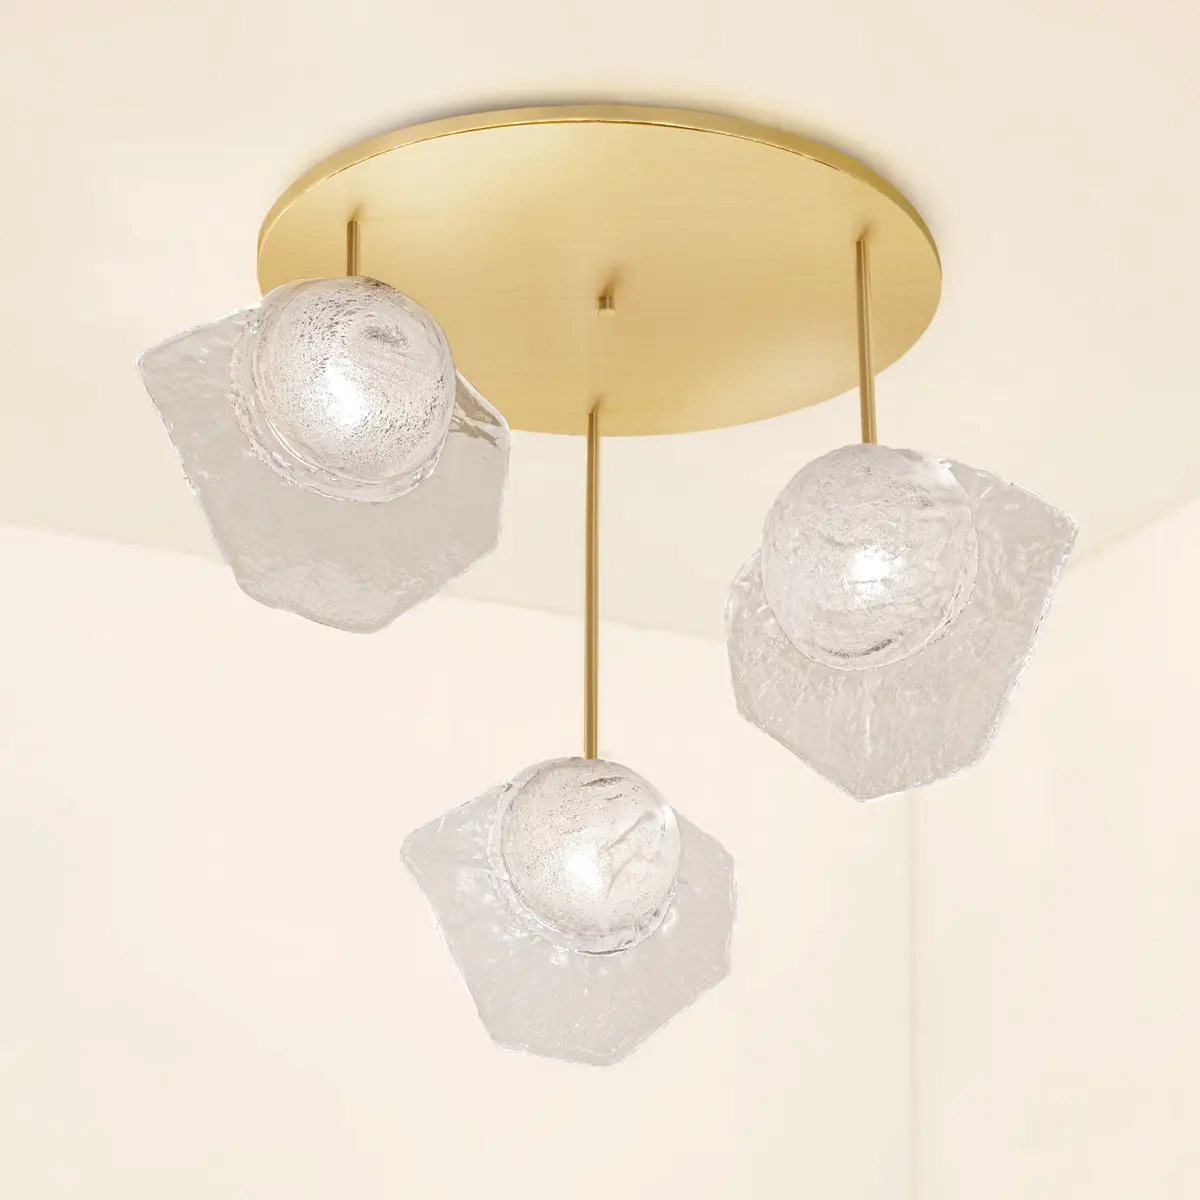 Vento ceiling light by gaspare asaro